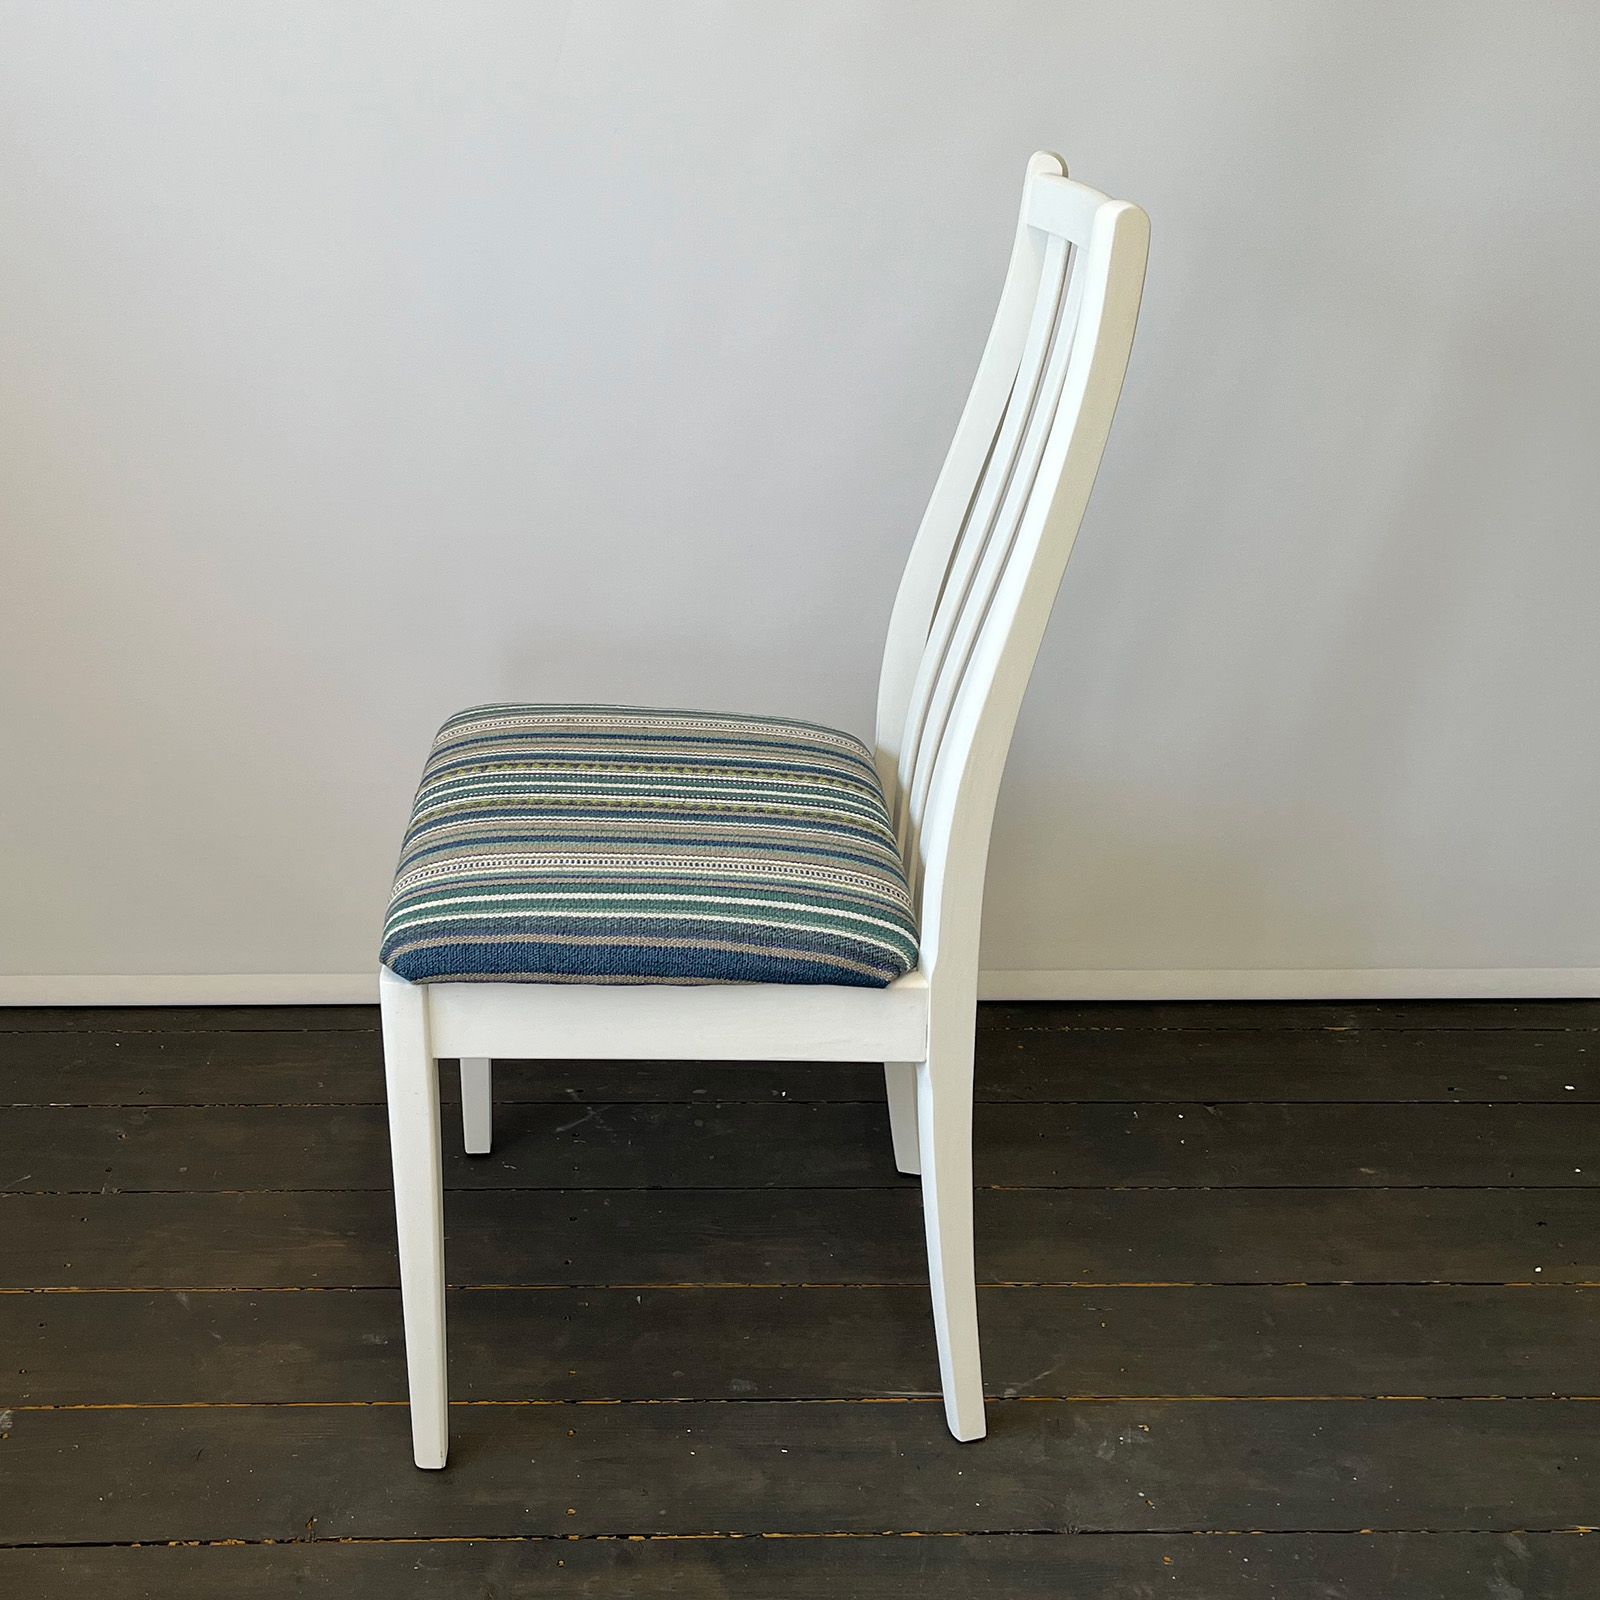 Ercol style chair side view